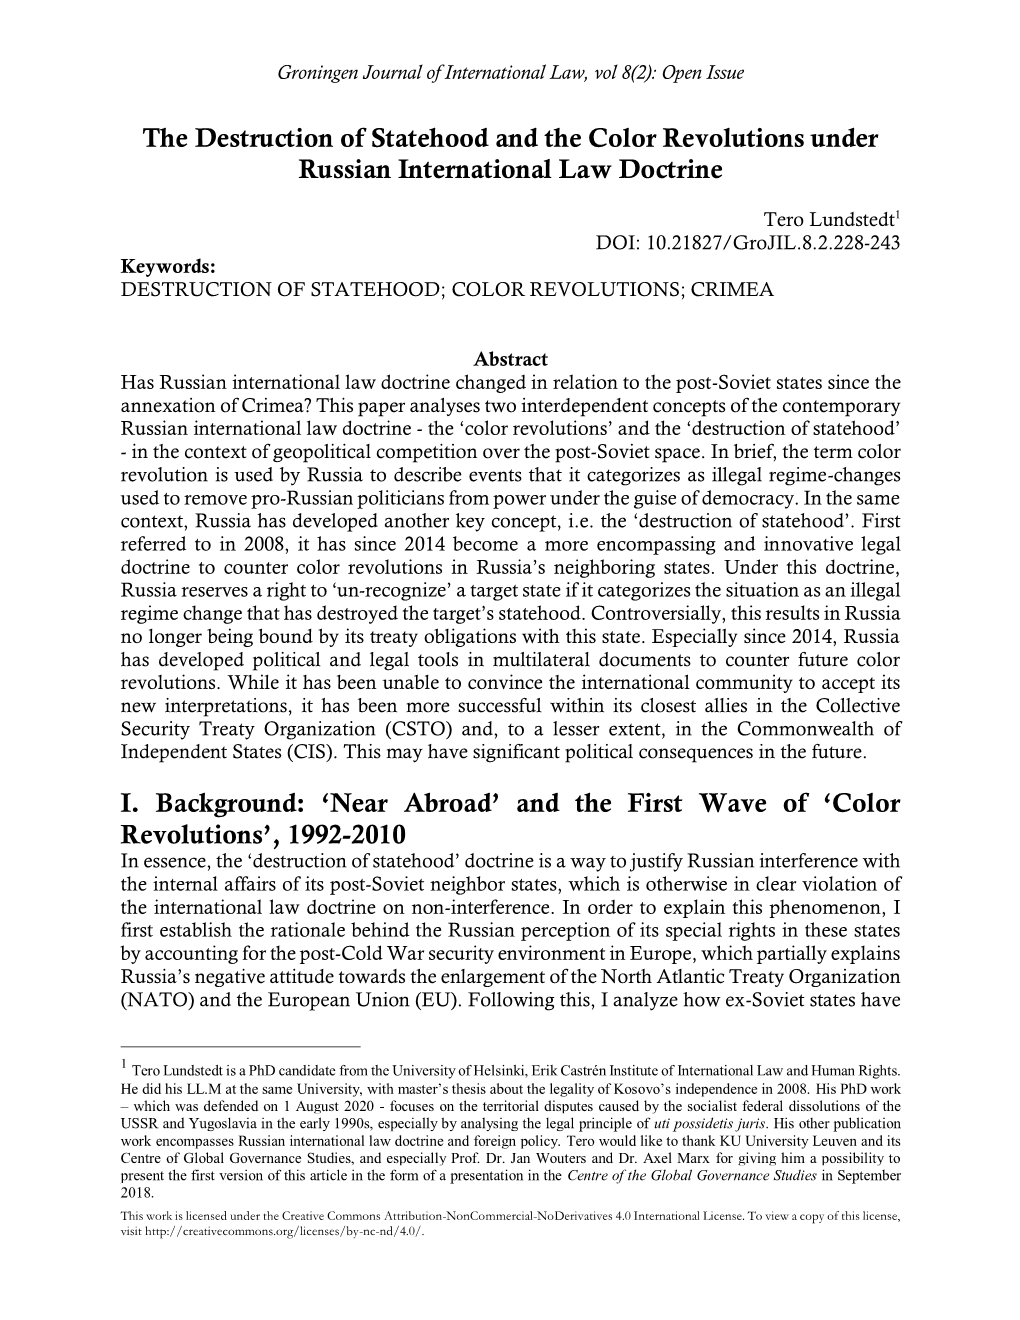 The Destruction of Statehood and the Color Revolutions Under Russian International Law Doctrine